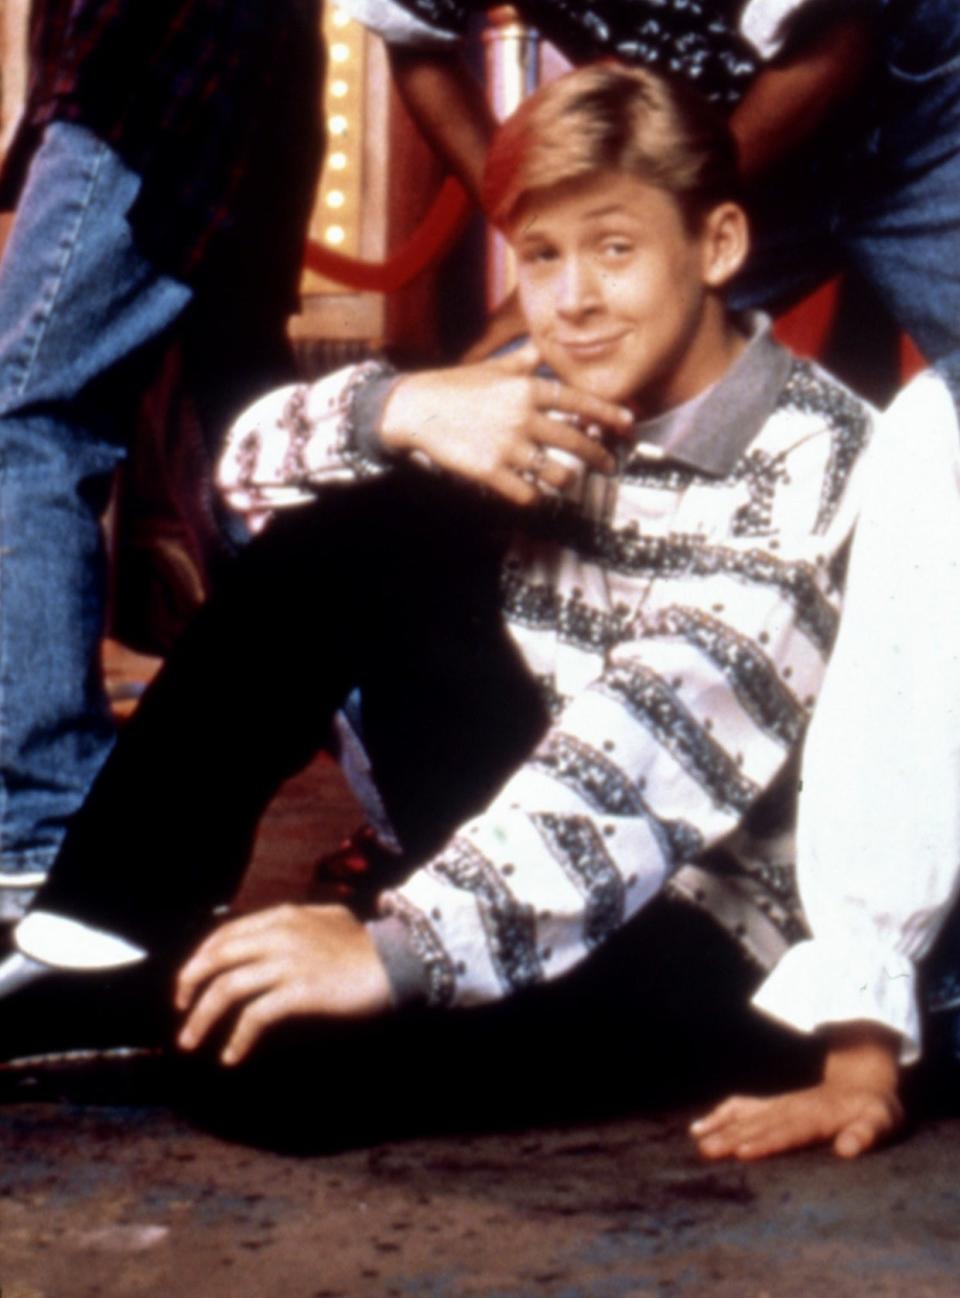 Somehow, the casting directors at The All New Mickey Mouse Club were completely on one and cast Ryan, Justin Timberlake, Britney Spears, and Christina Aguilera all at the same time!